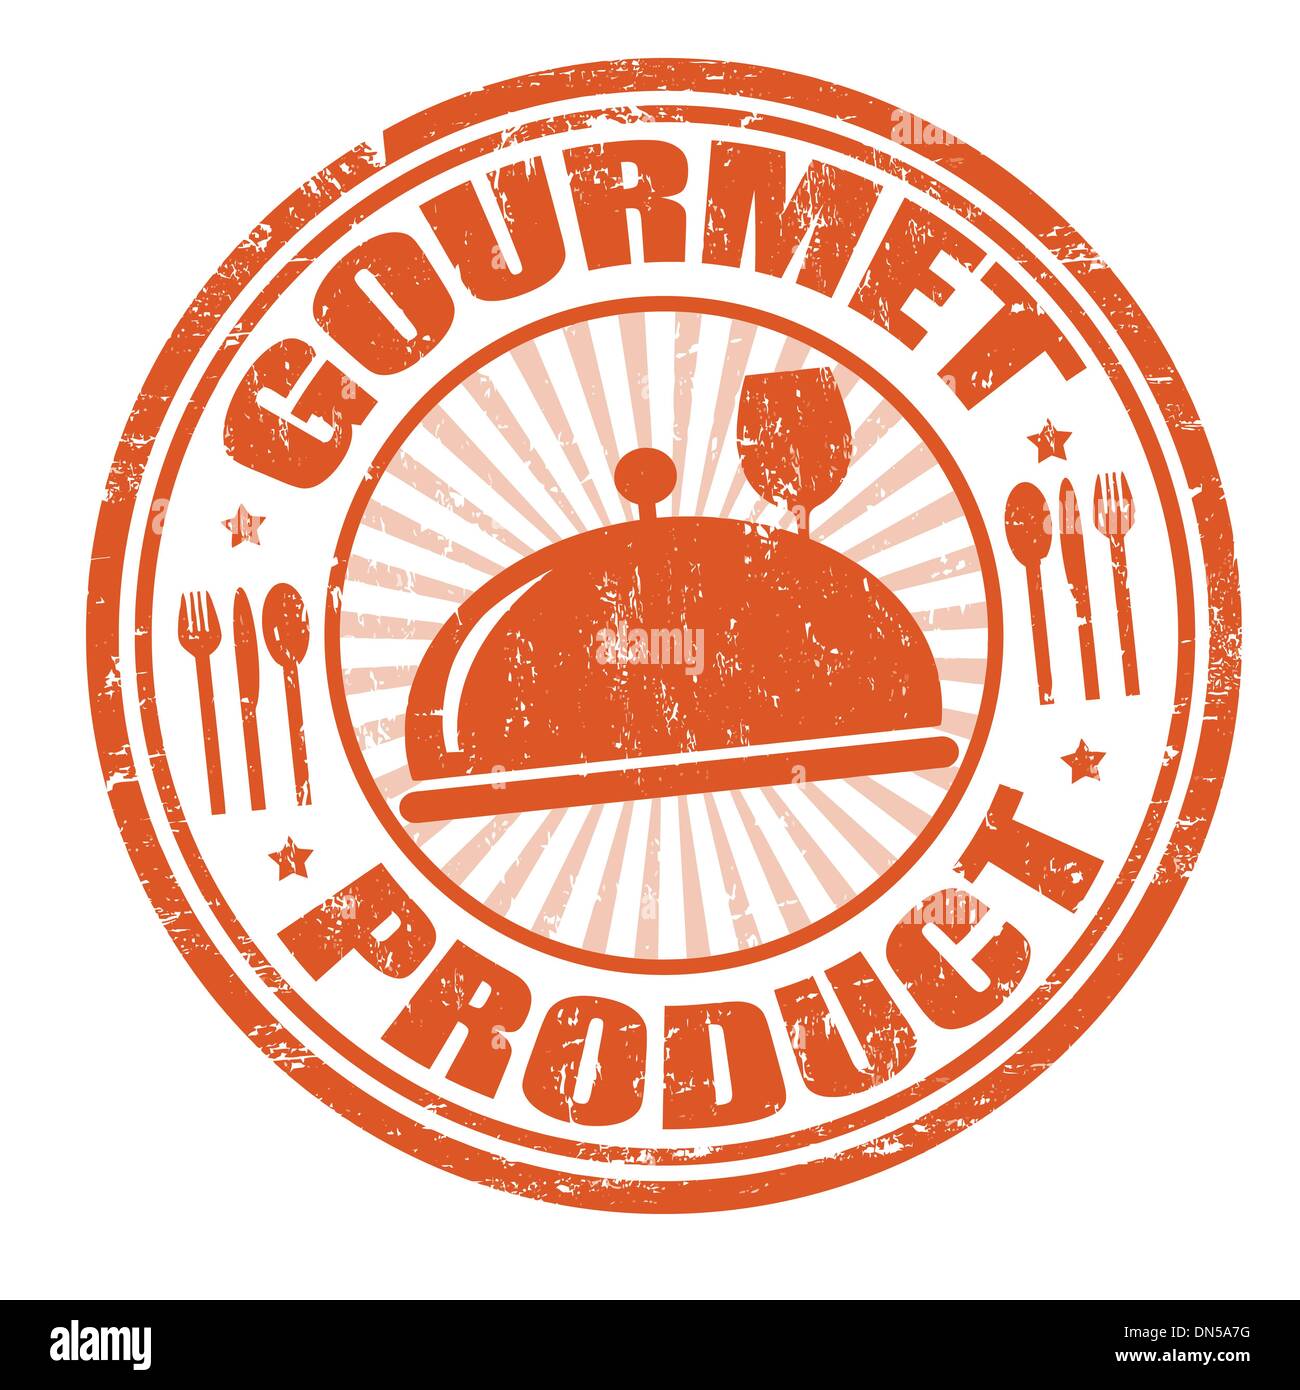 Gourmet product stamp Stock Vector